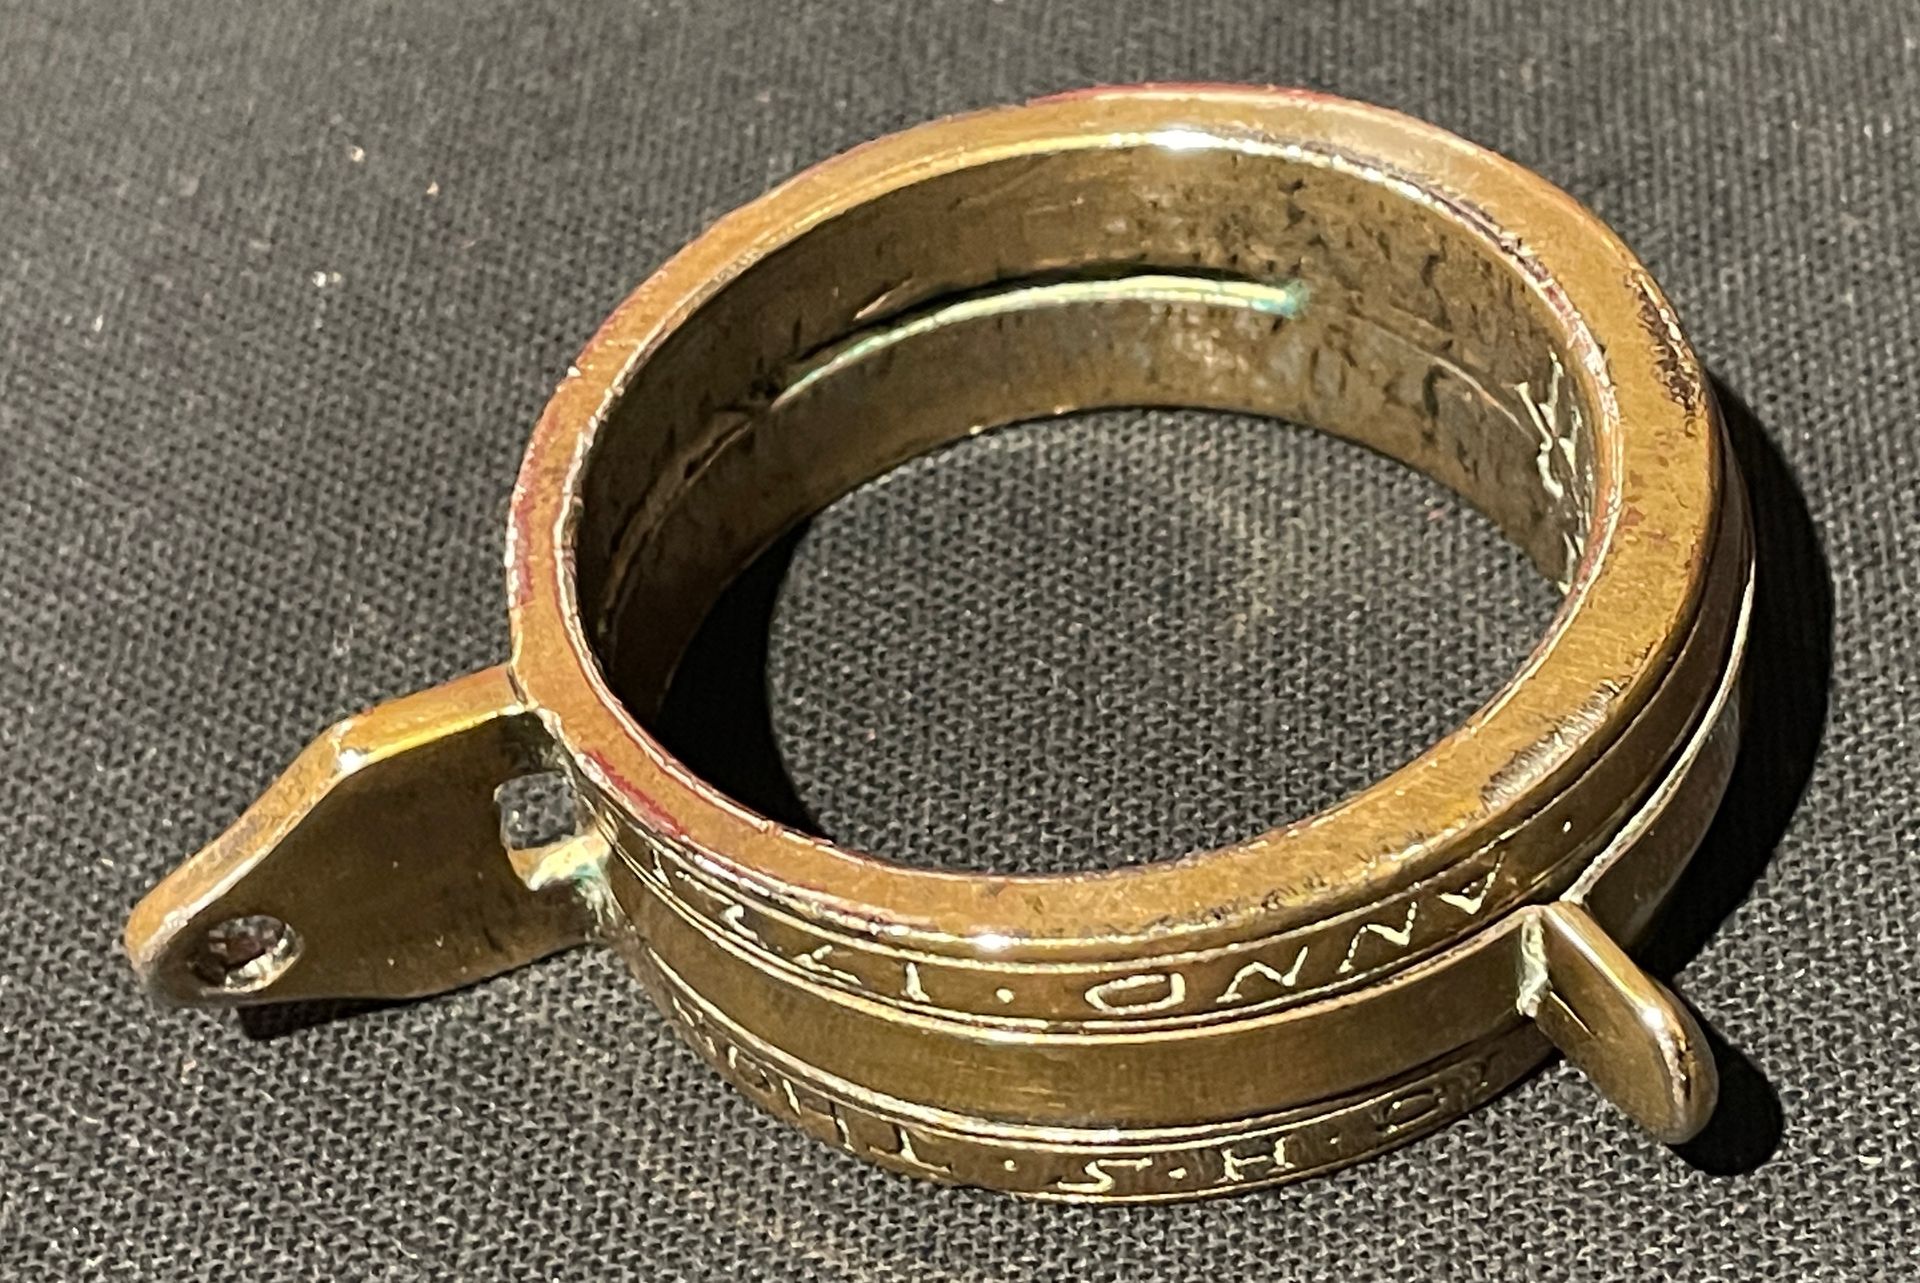 Null Sun ring in chased bronze, signed THON and dated 1721
Diam. 6 cm